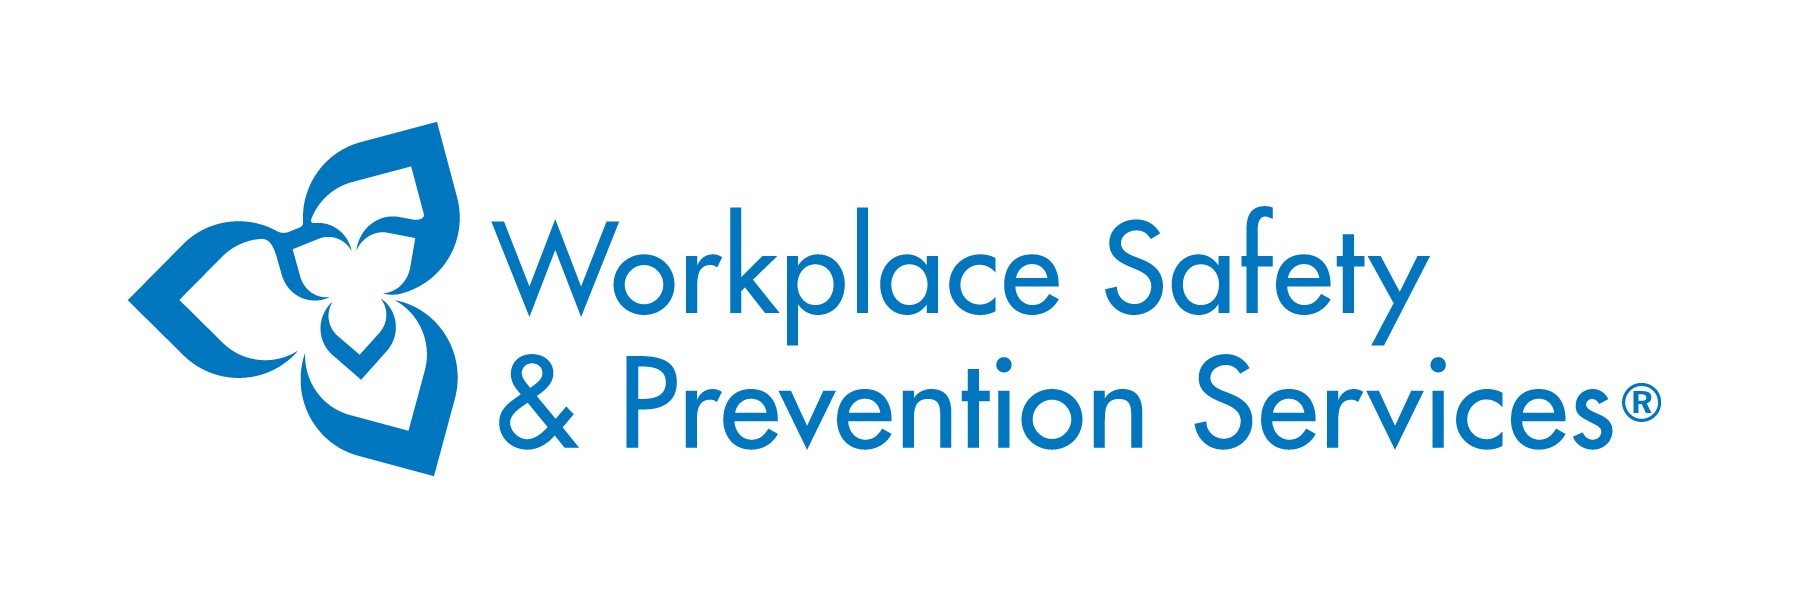 Workplace Safety & Prevention Services™ (WSPS)